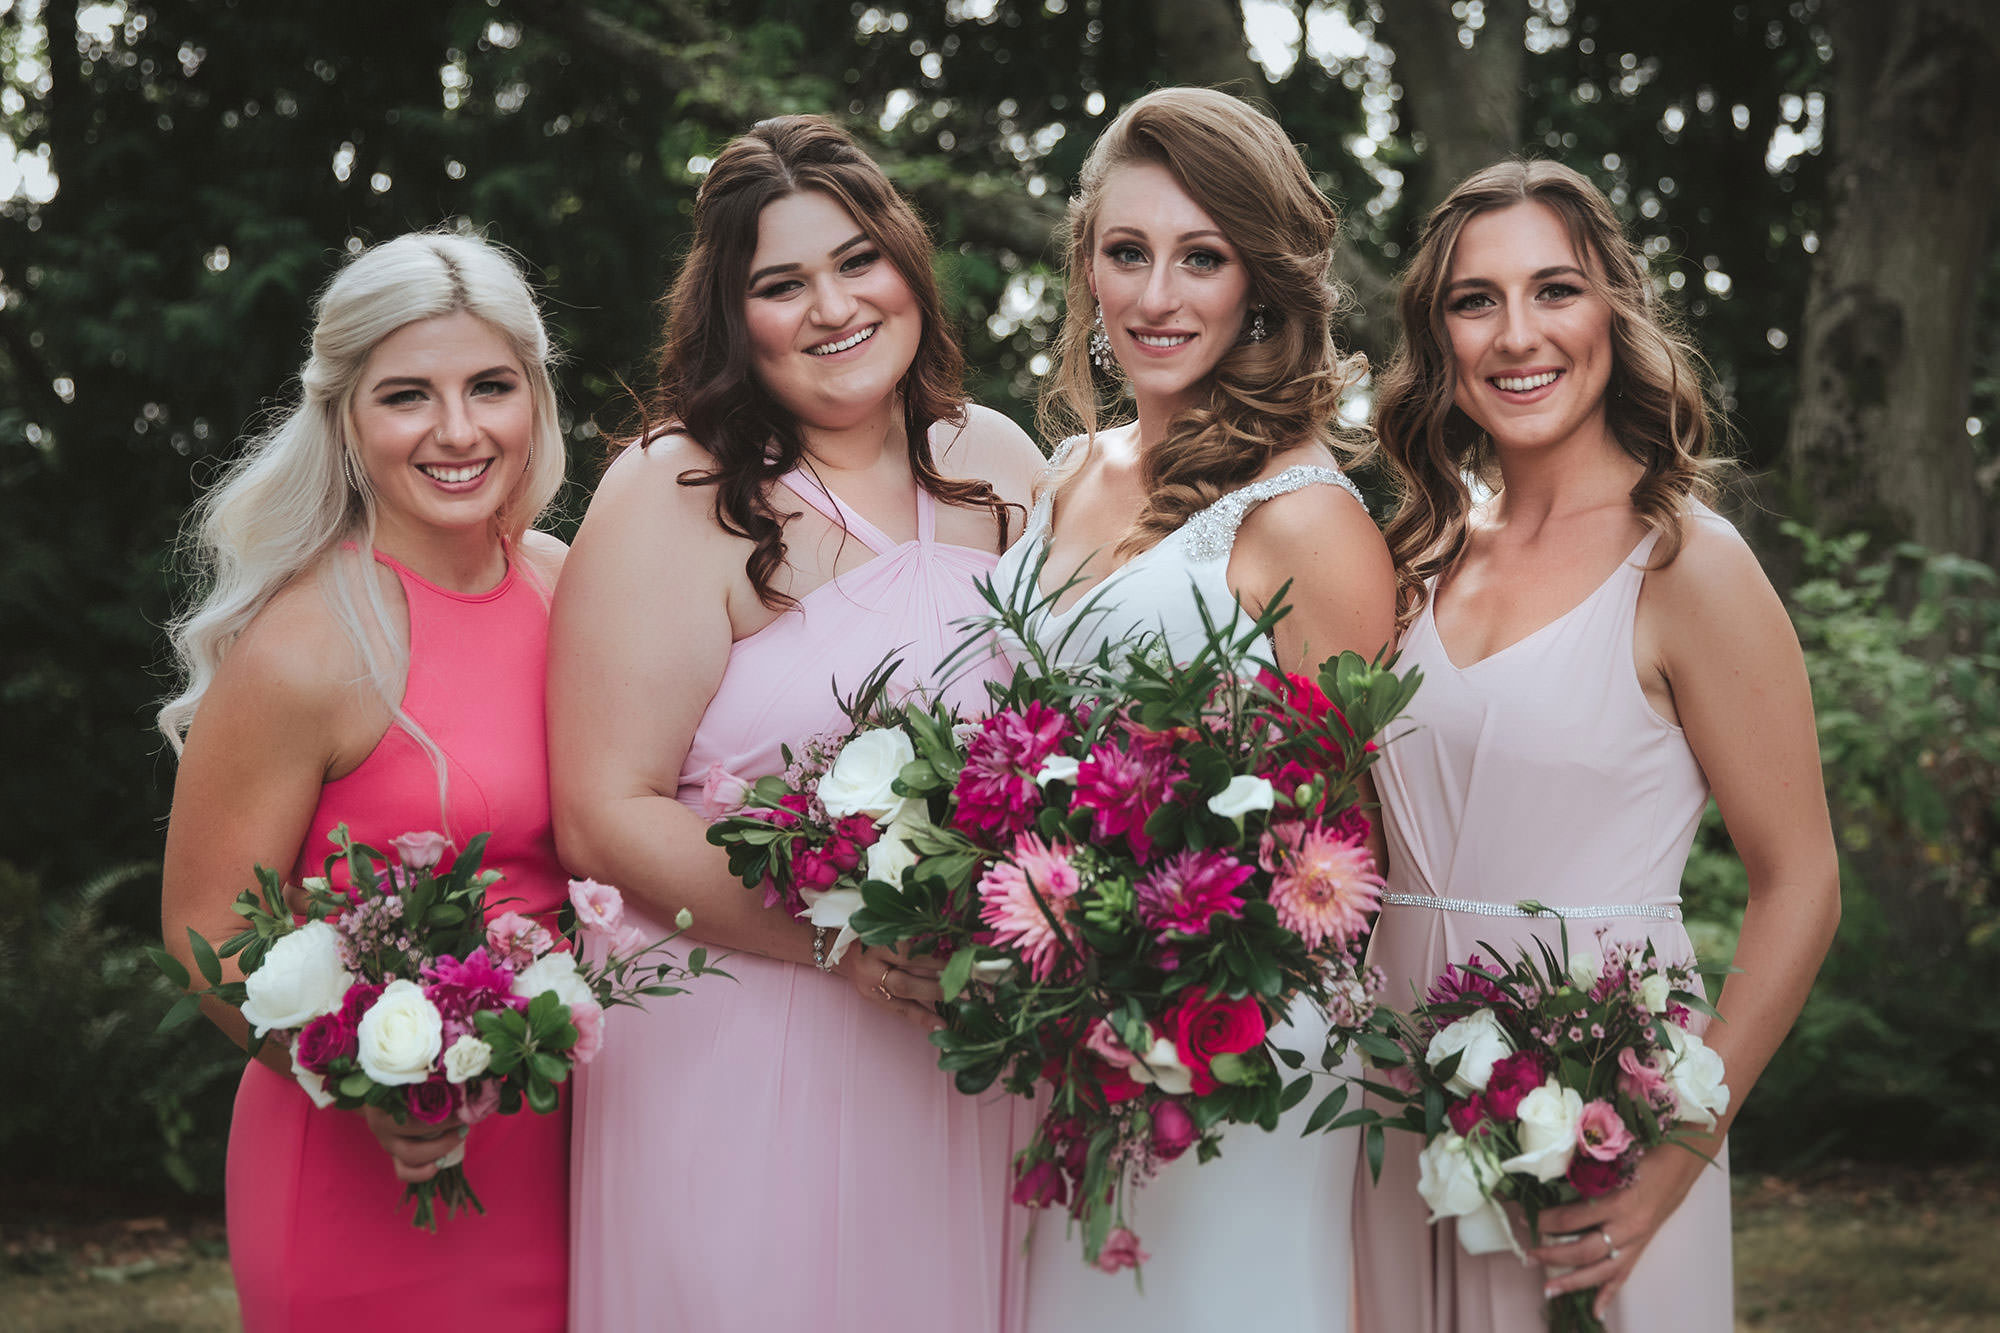 Group photo of bride with her maids